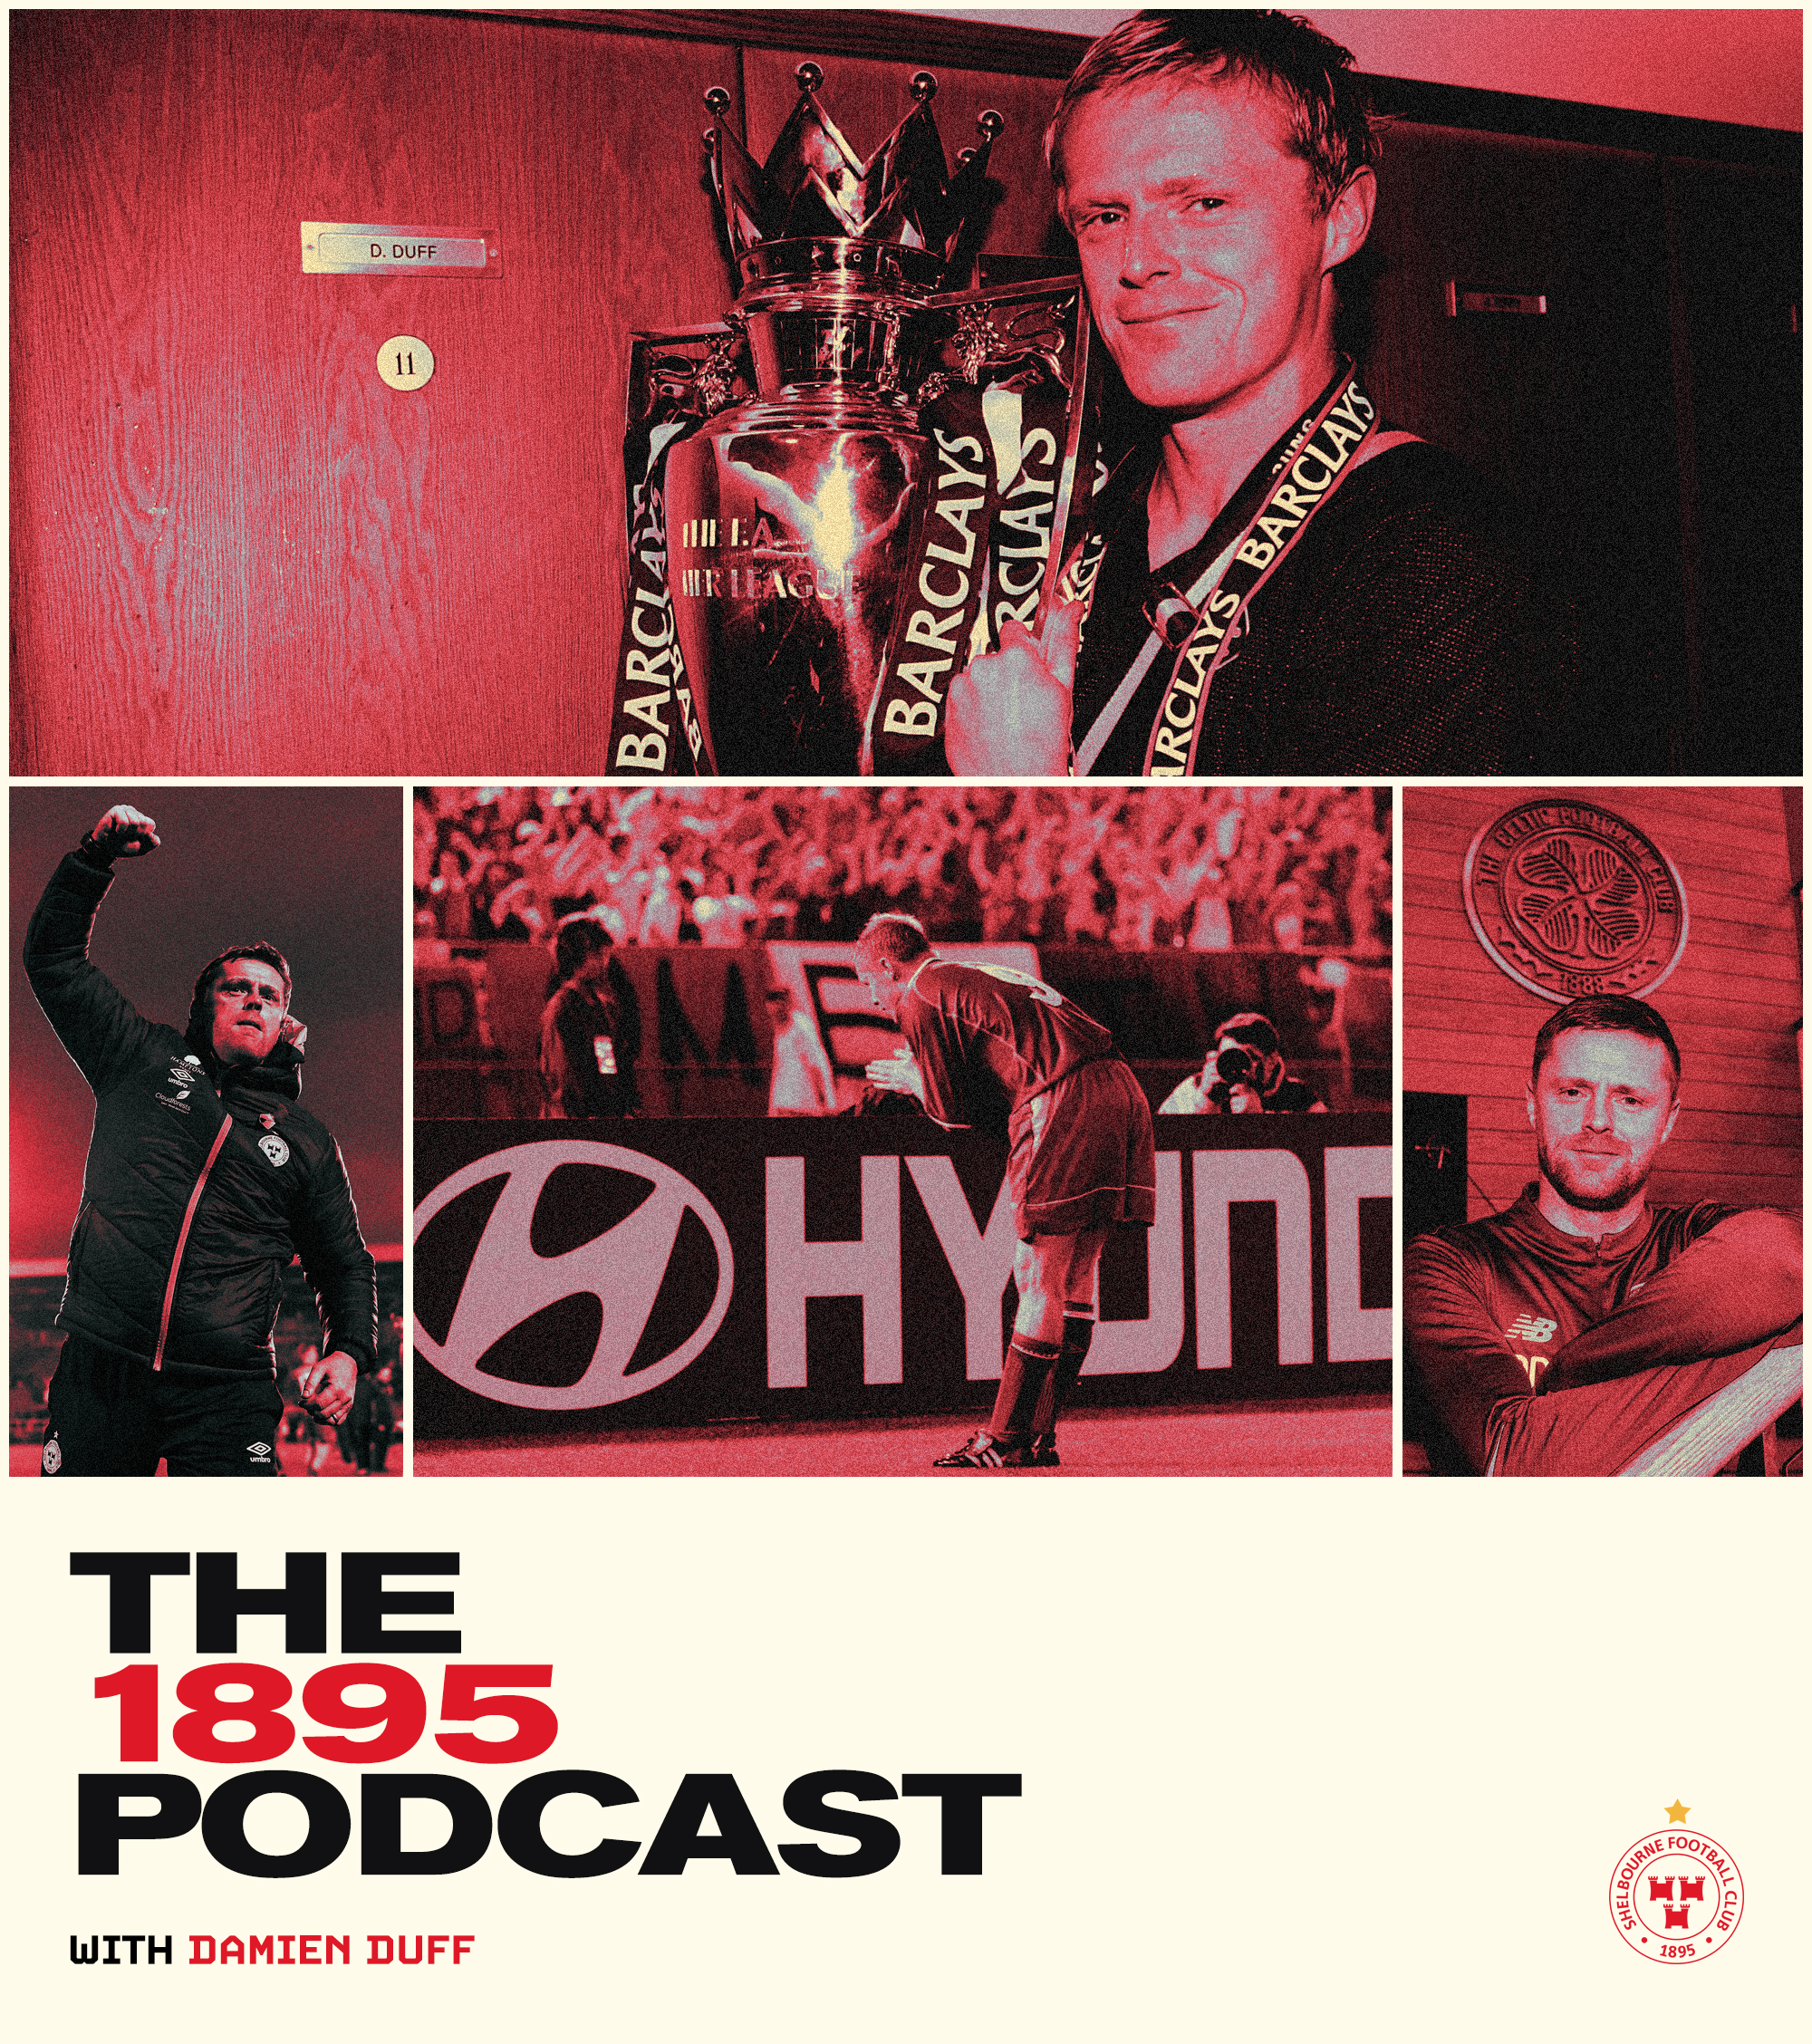 The 1895 Podcast: Damien Duff